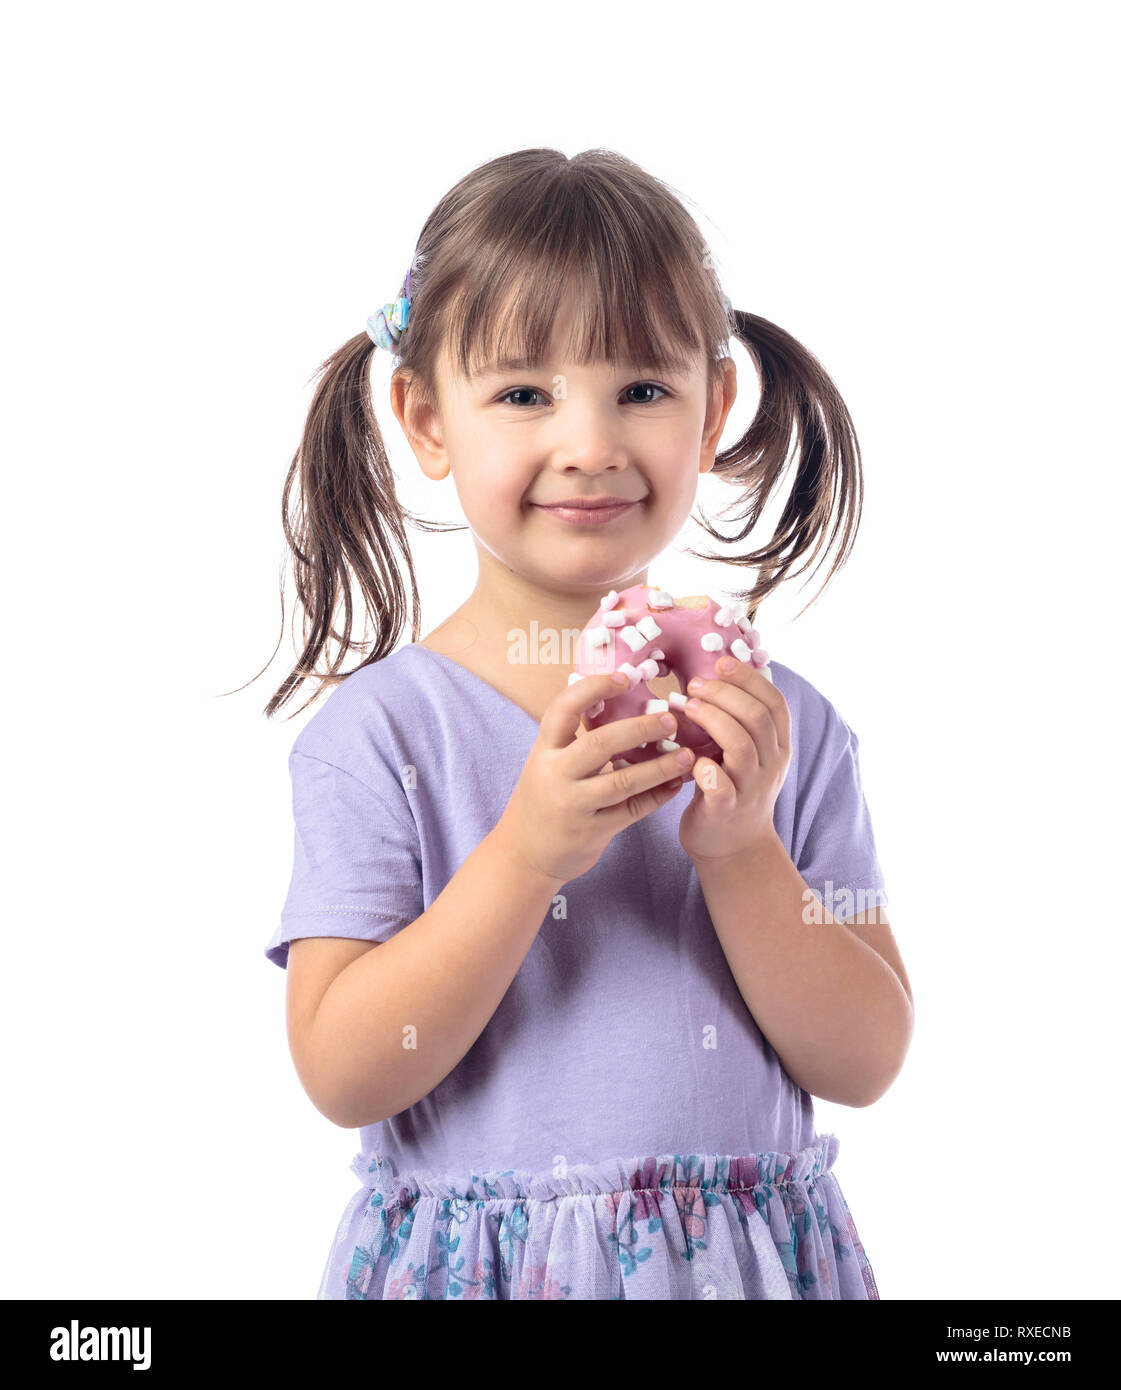 Four-year-old girl in a purple t-shirt eat donut.The girl's hair is tied in tails. Isolated on white background. Stock Photo